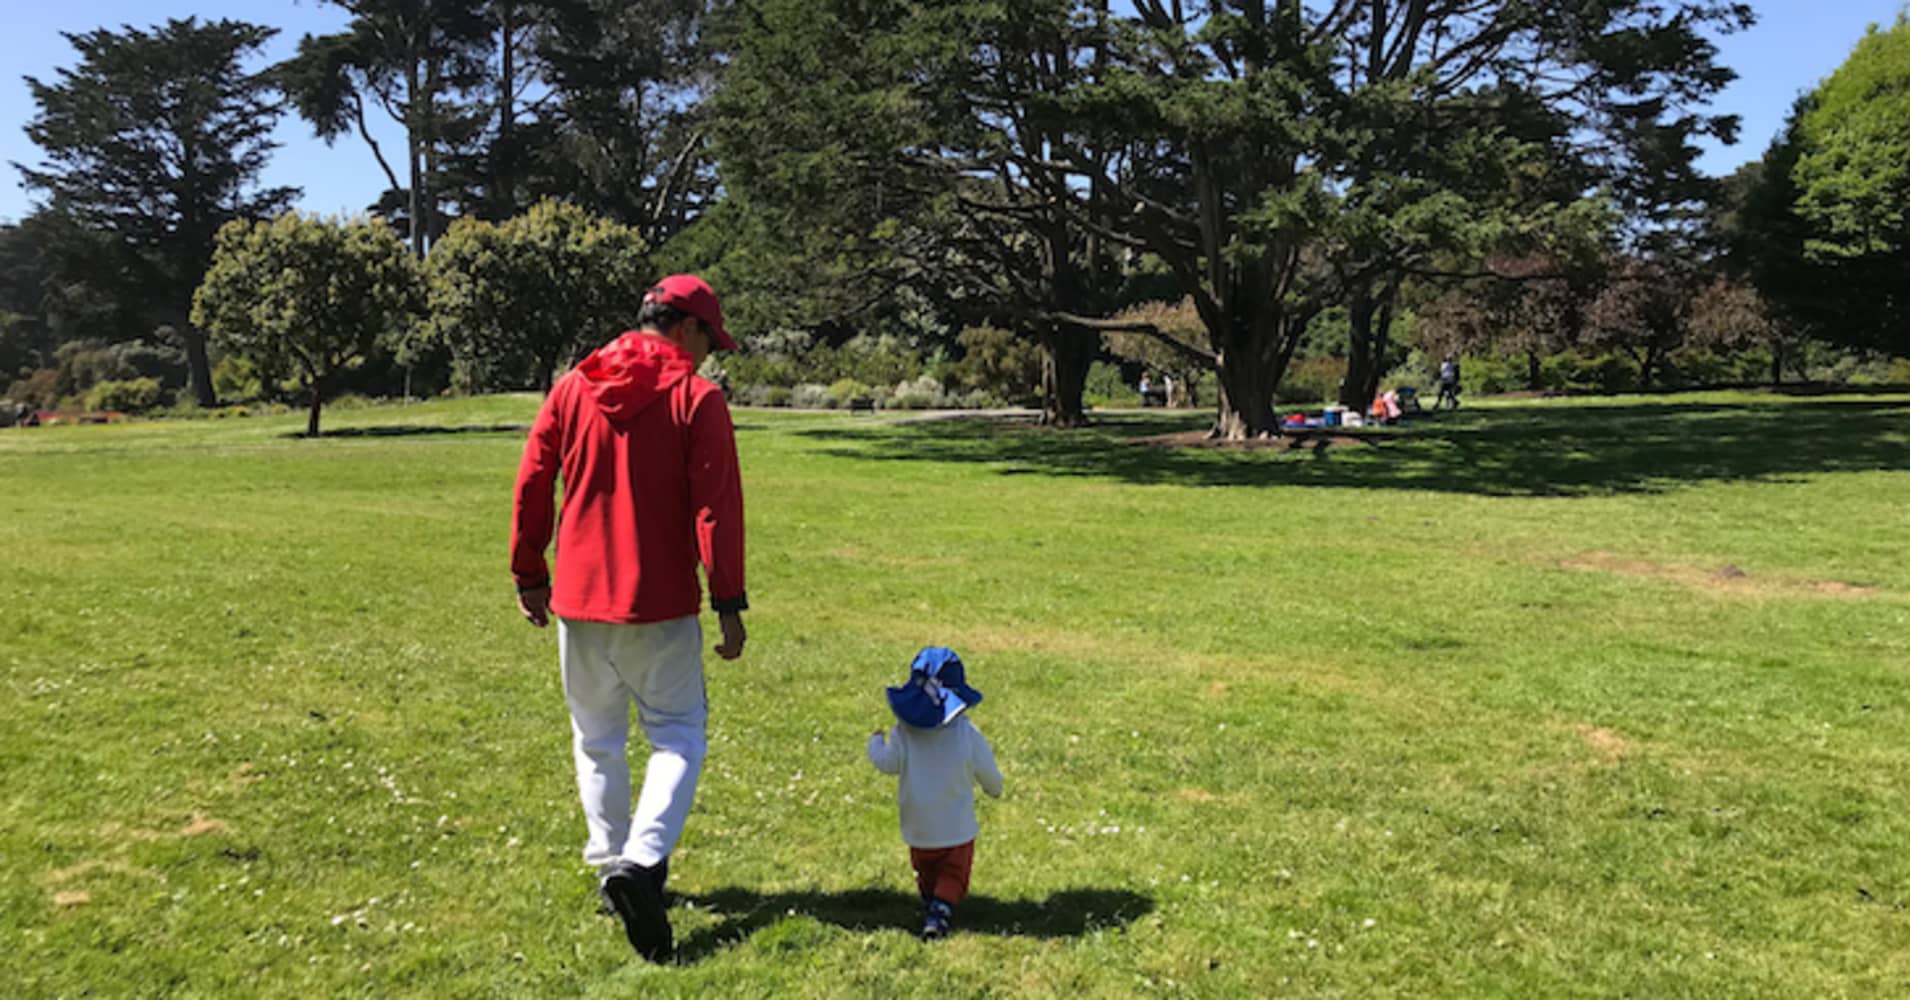 Sam Dogen and his son play in Golden Gate Park, San Fancisco.